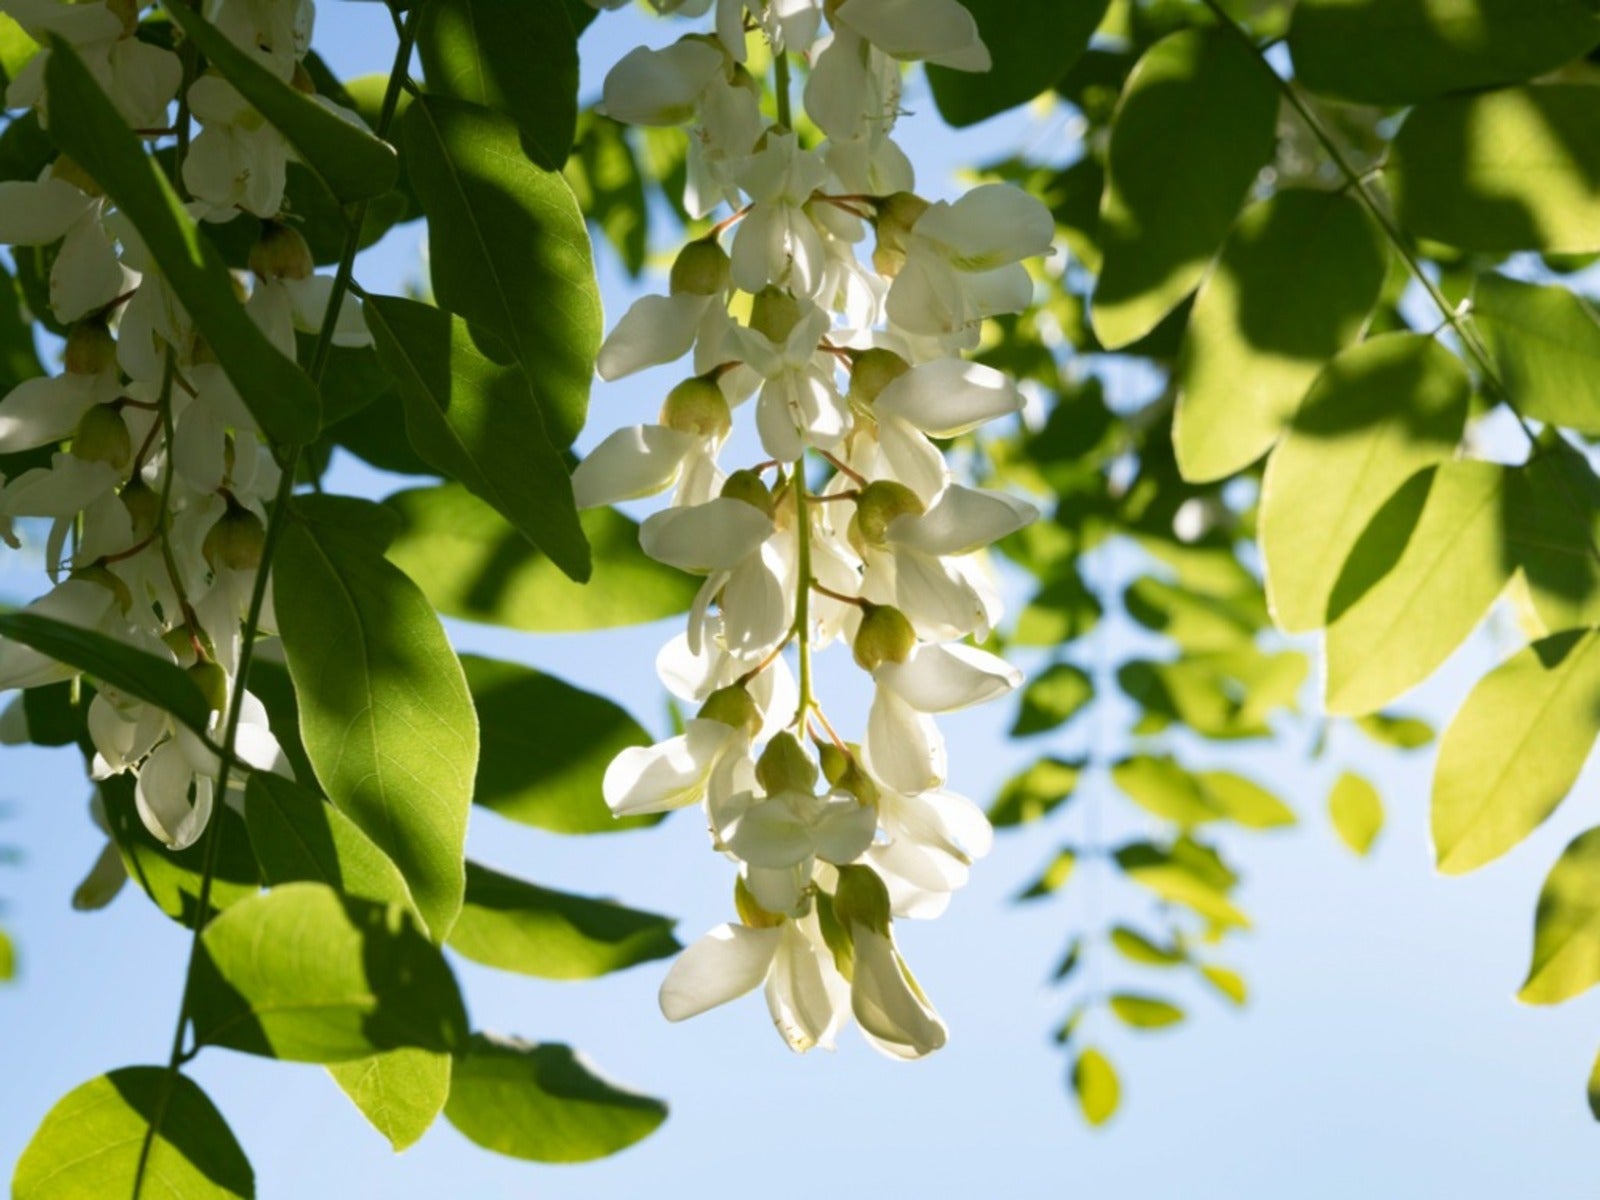 White acacia flowers growing on a tree